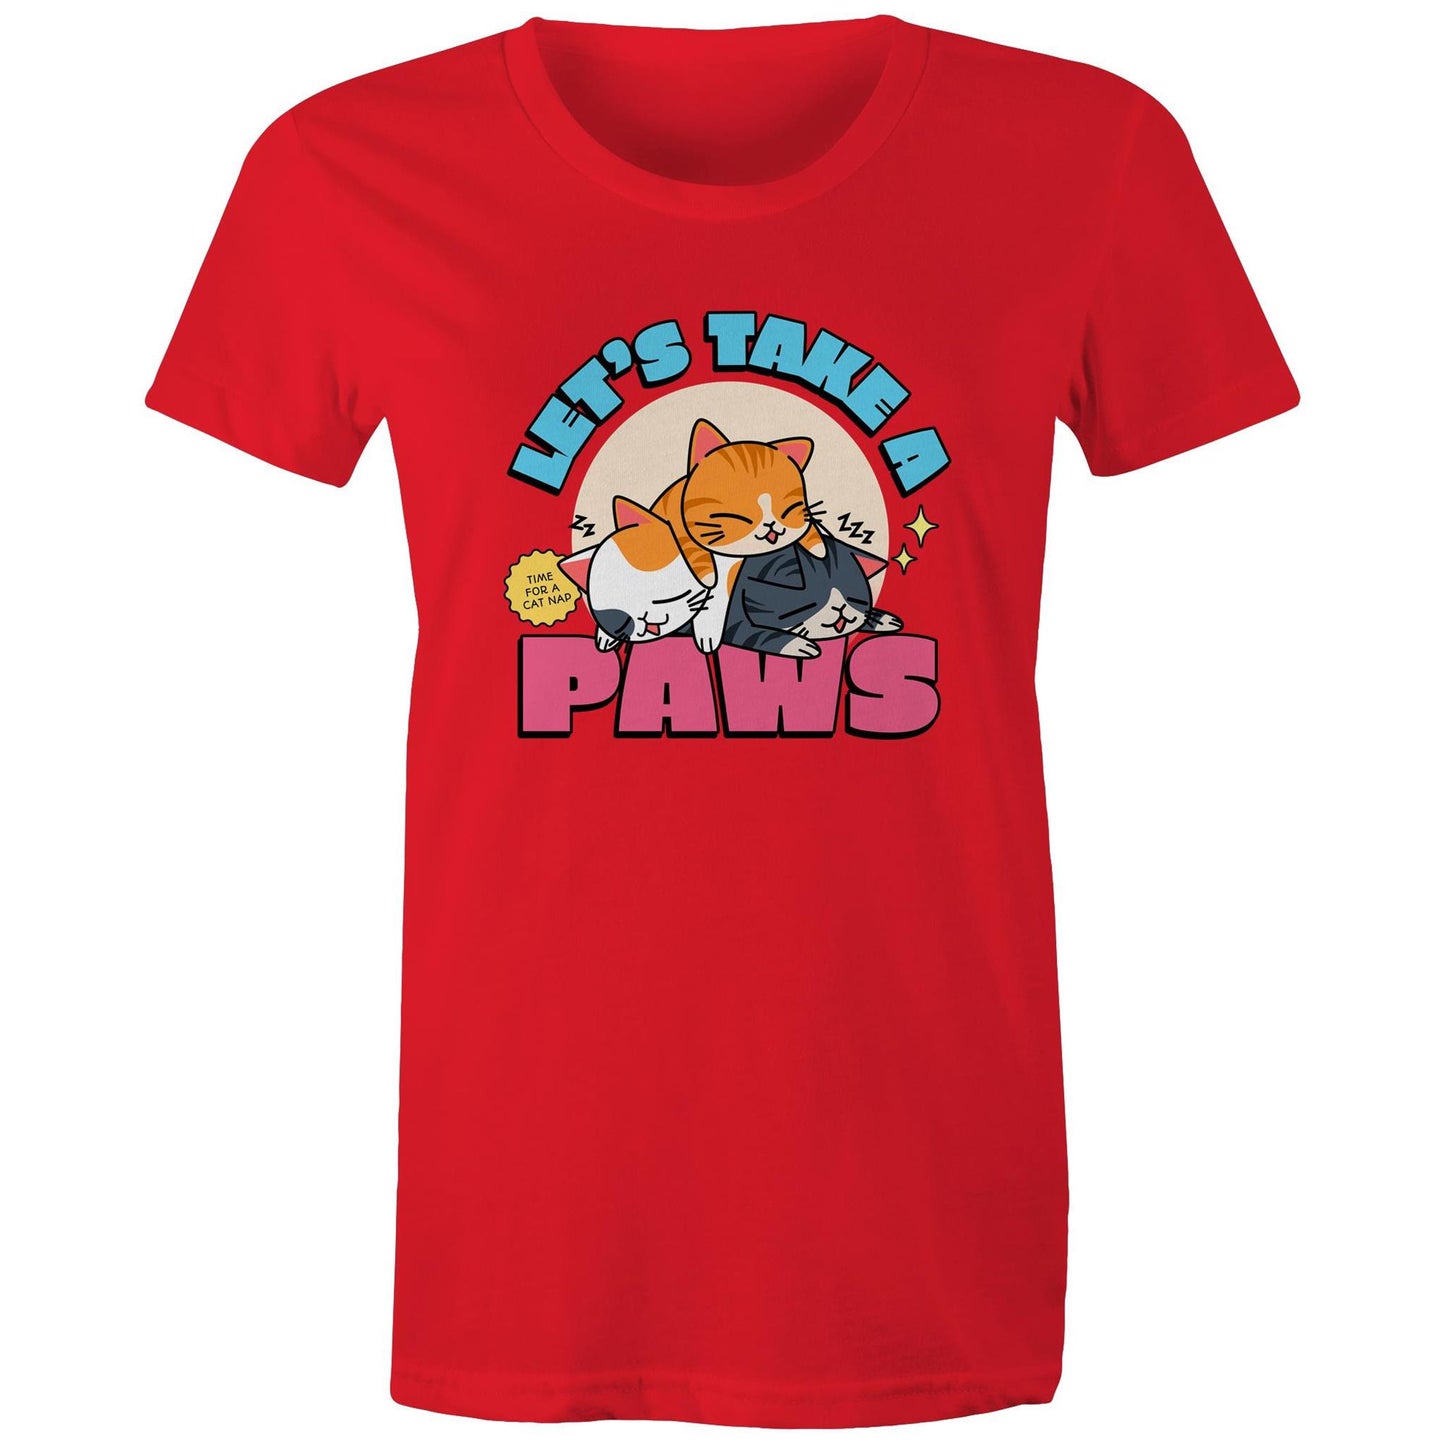 Let's Take A Paws, Time For A Cat Nap - Womens T-shirt Red Womens T-shirt animal